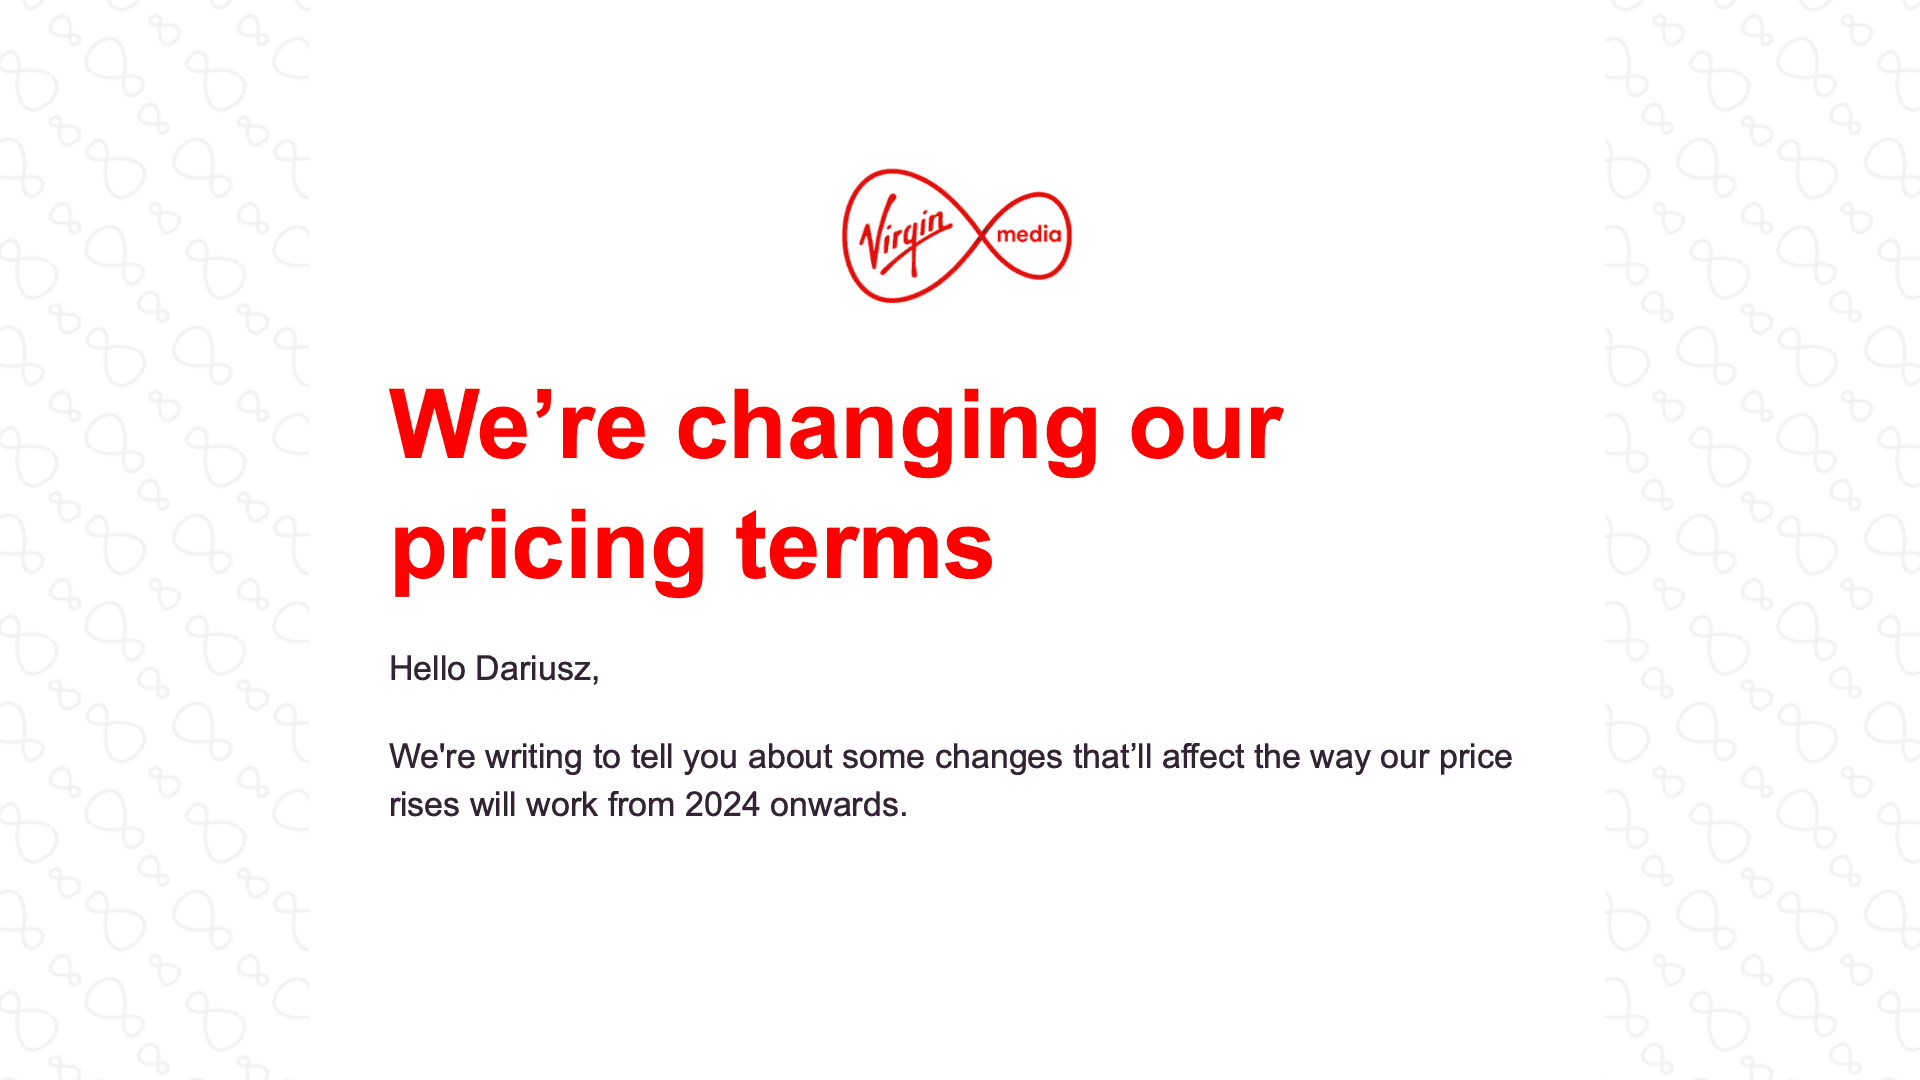 Virgin Media joining the gang and will start increasing prices in mid-contract